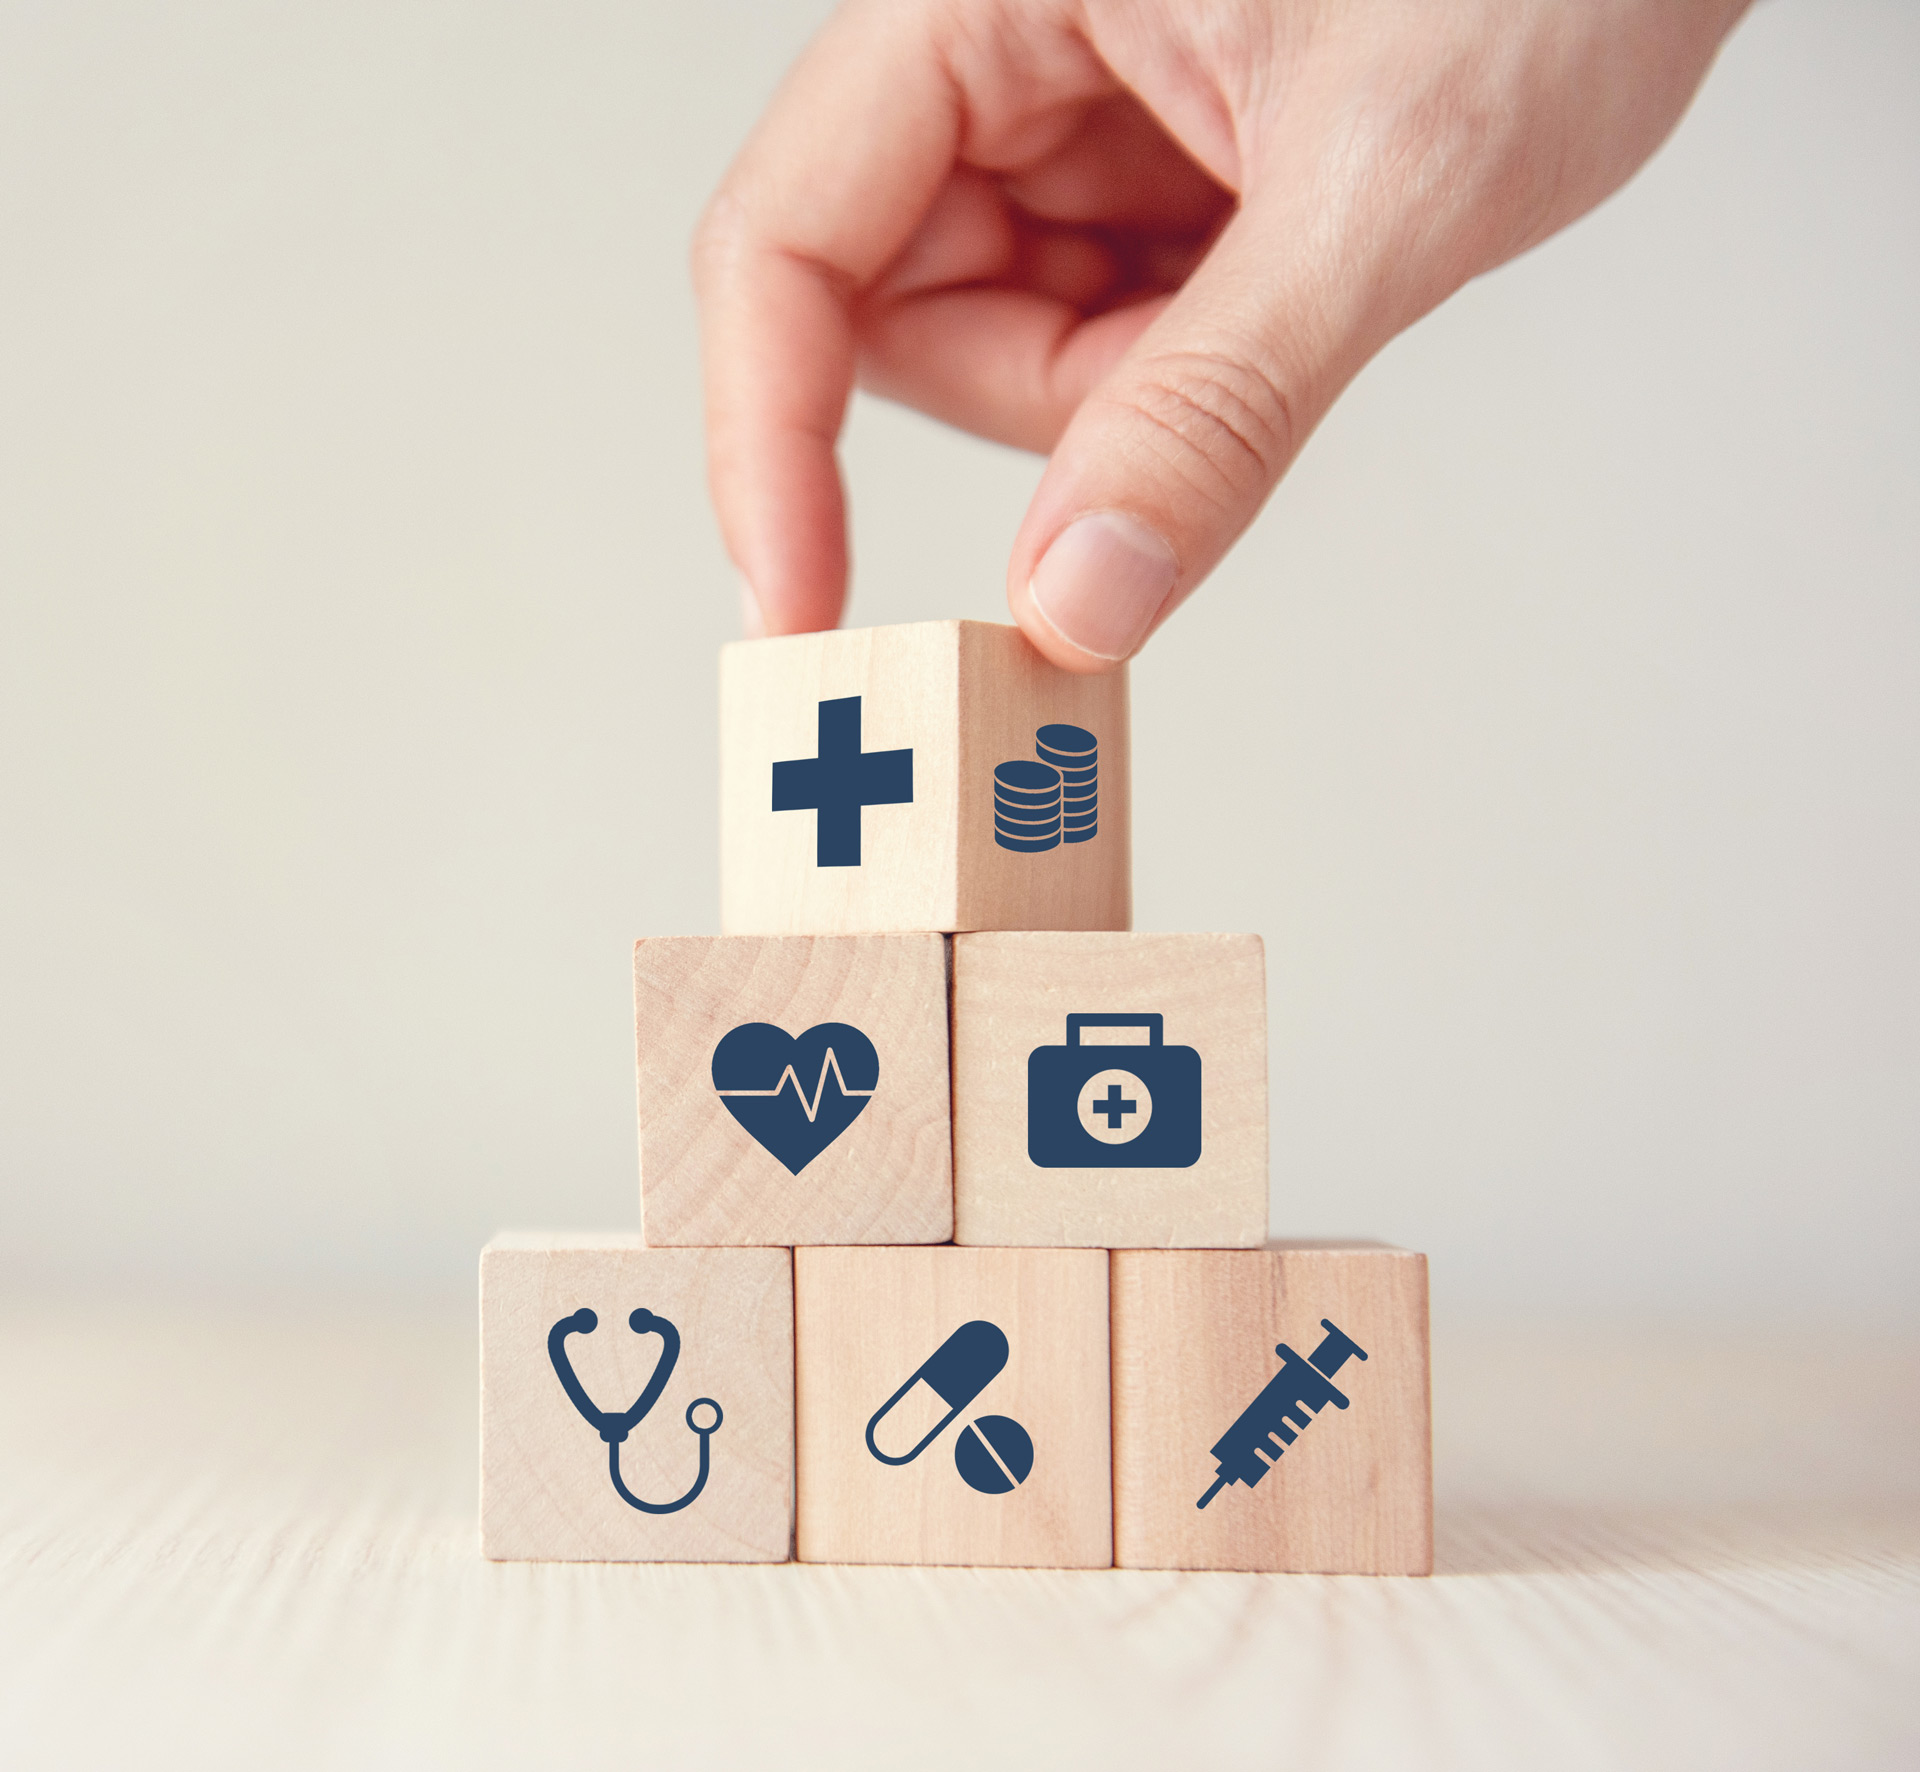 health-insurance-concept-reduce-medical-expenses-hand-flip-wood-cube-with-icon-healthcare-medical-coin-wood-background-copy-space